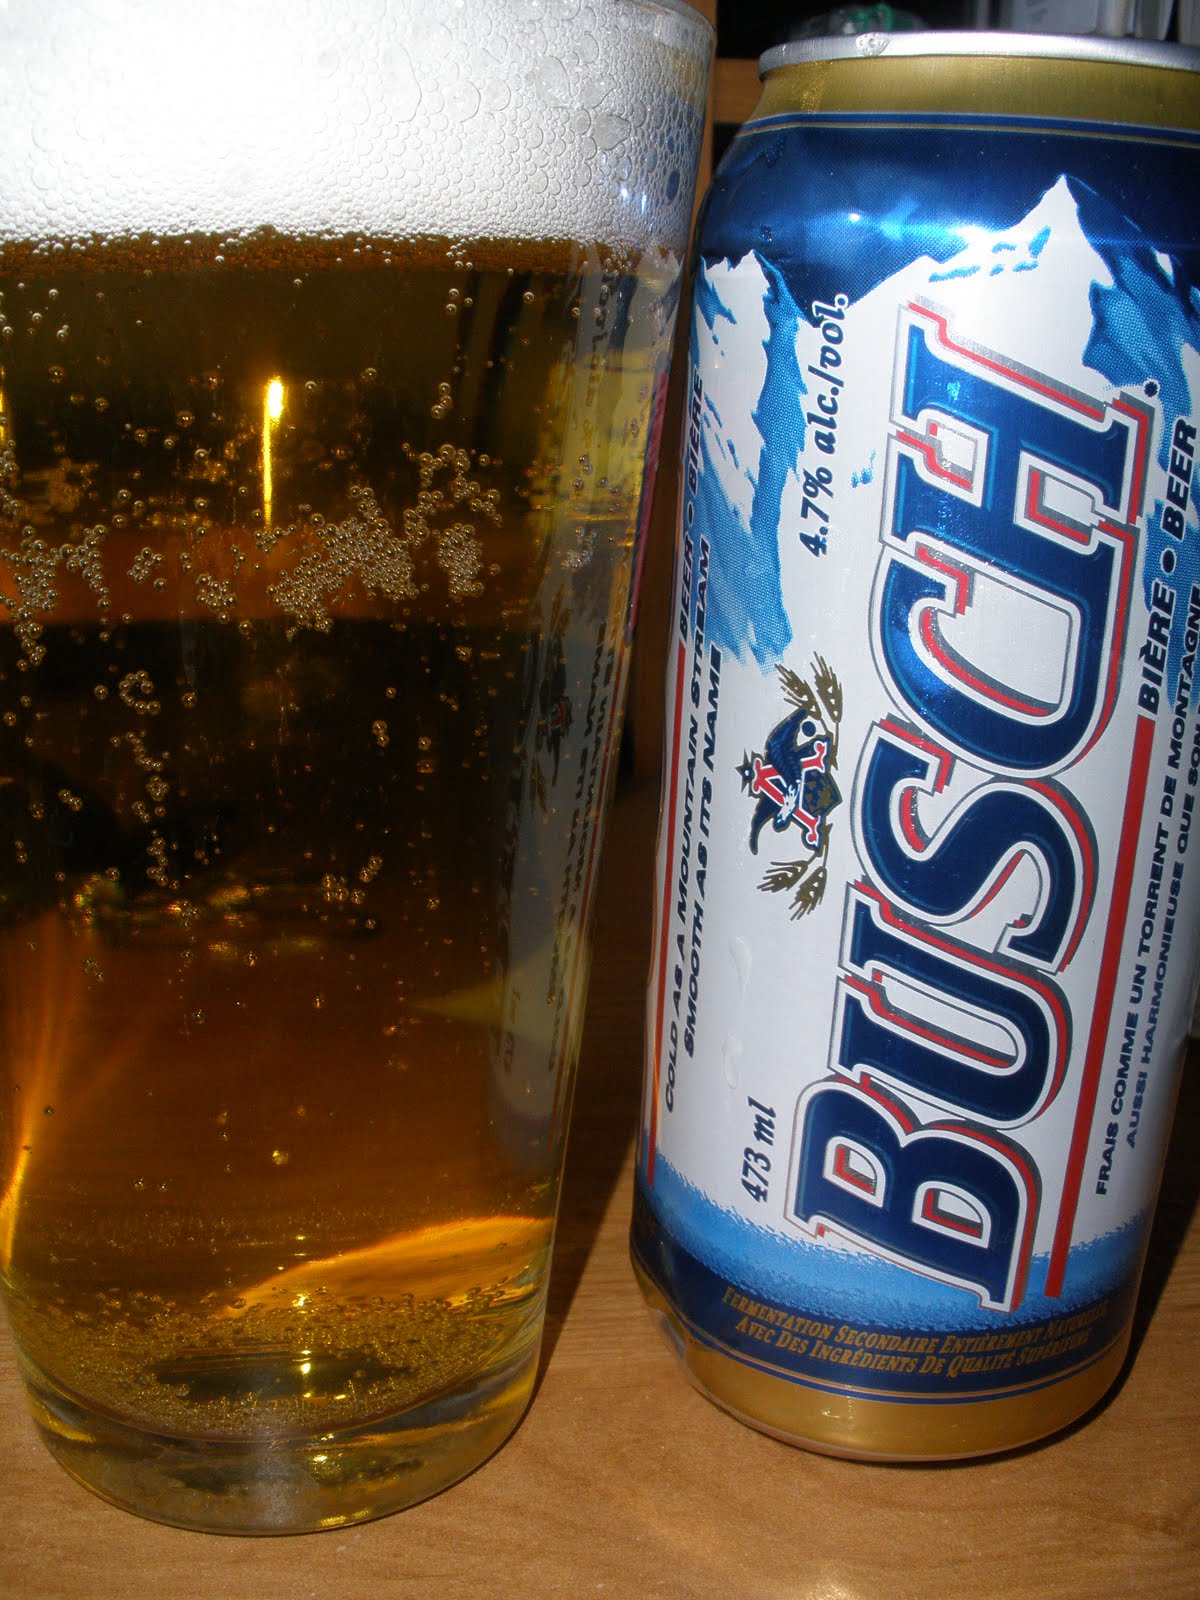 Busch Beer Can Pours An Incredibly Pale